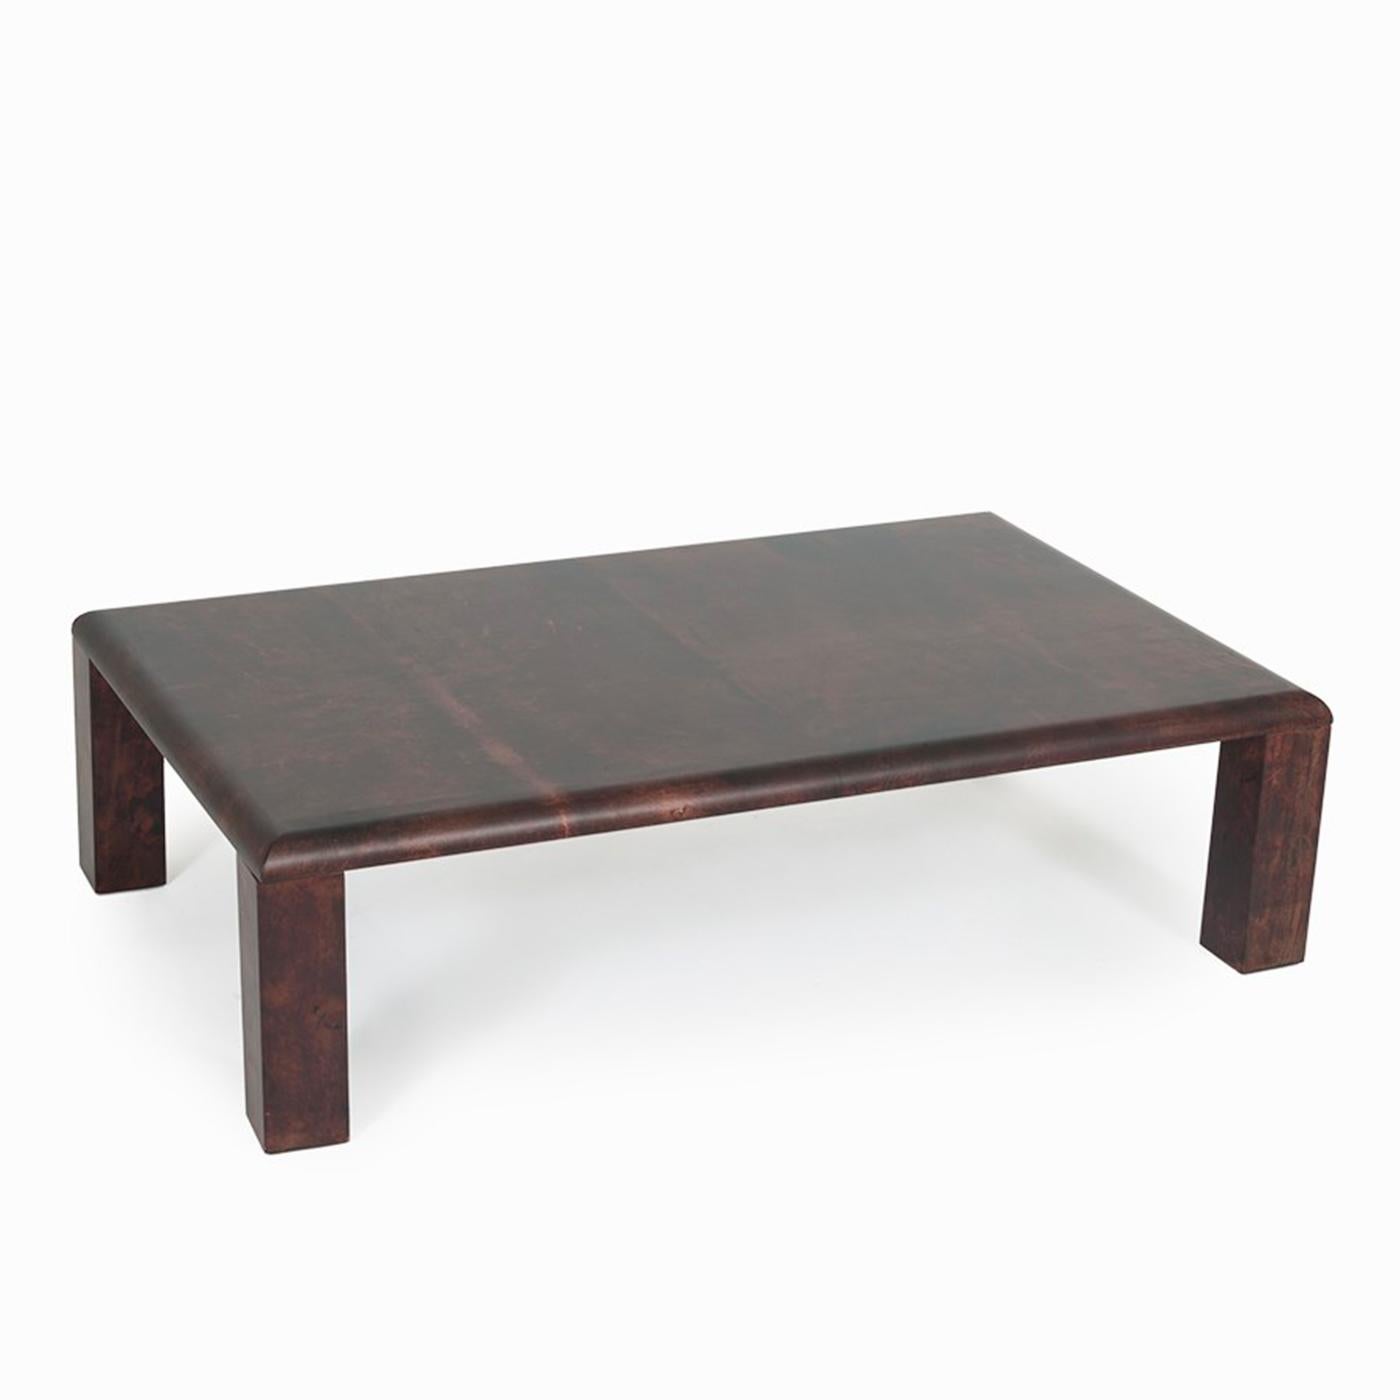 Striking in its simplicity, this one-of-a-kind coffee table is an original piece from Tura's collection and there is only one available. The low frame with a rectangular silhouette, whose sharp lines are softened by rounded edges and corners, is